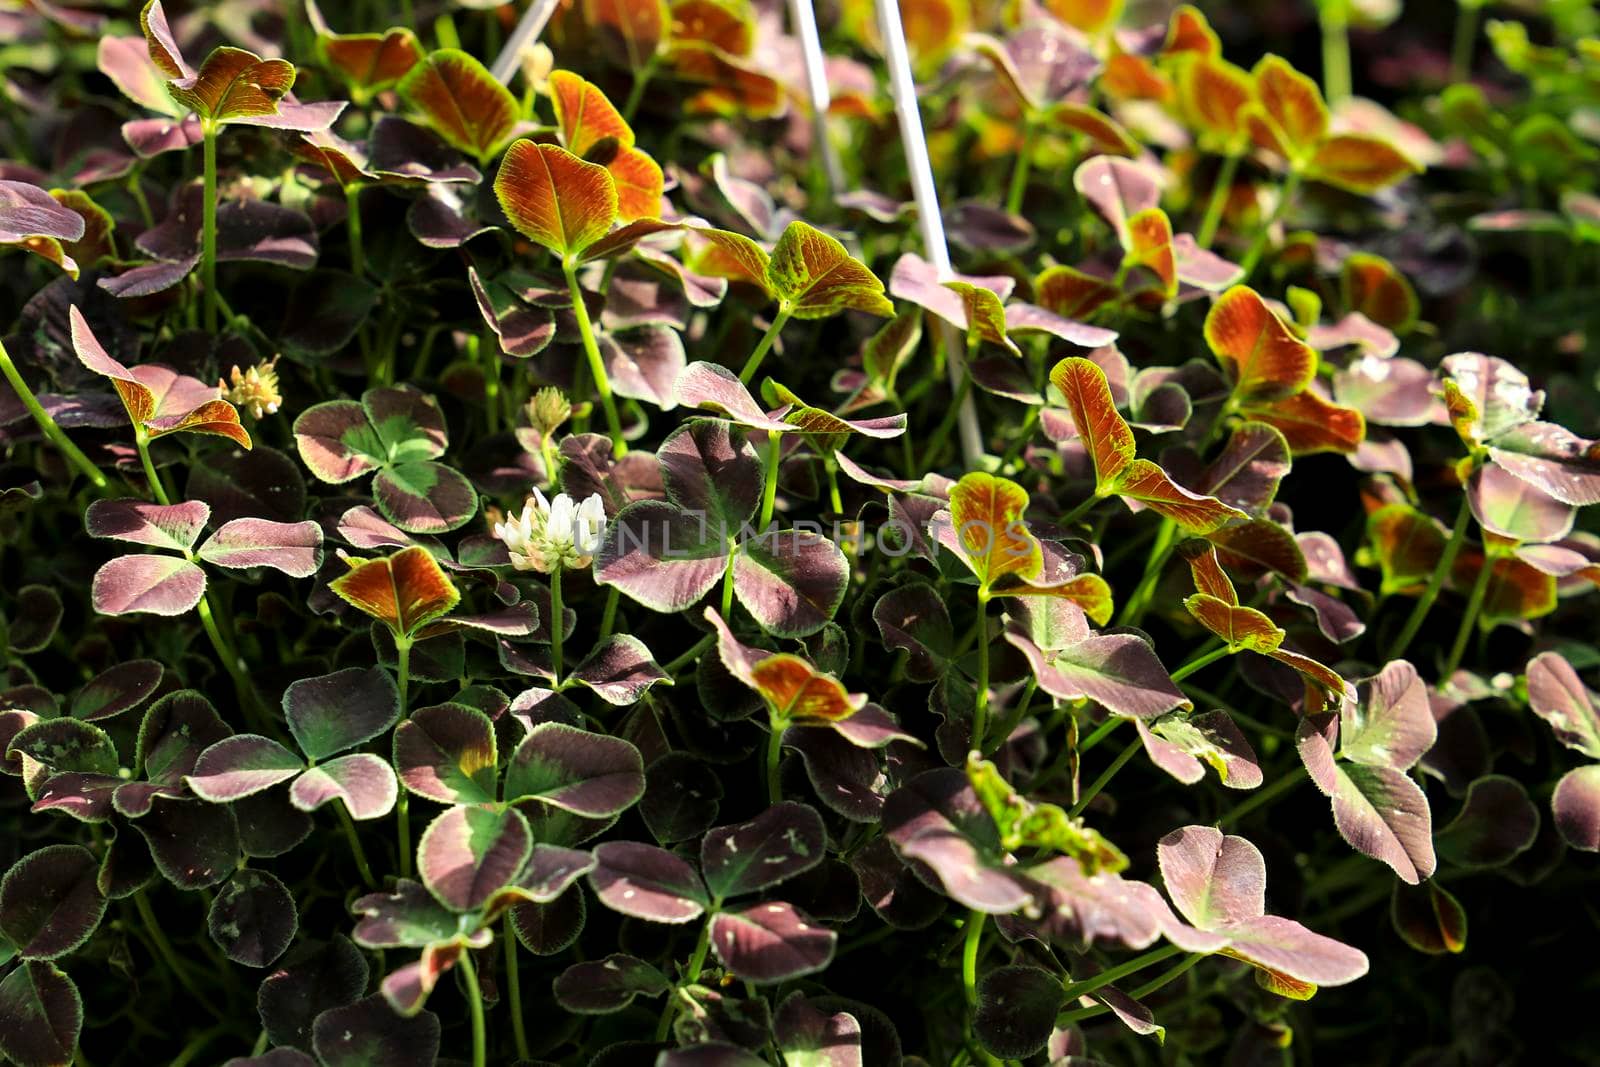 Colorful Oxalis plants, clovers, under the sun in the garden